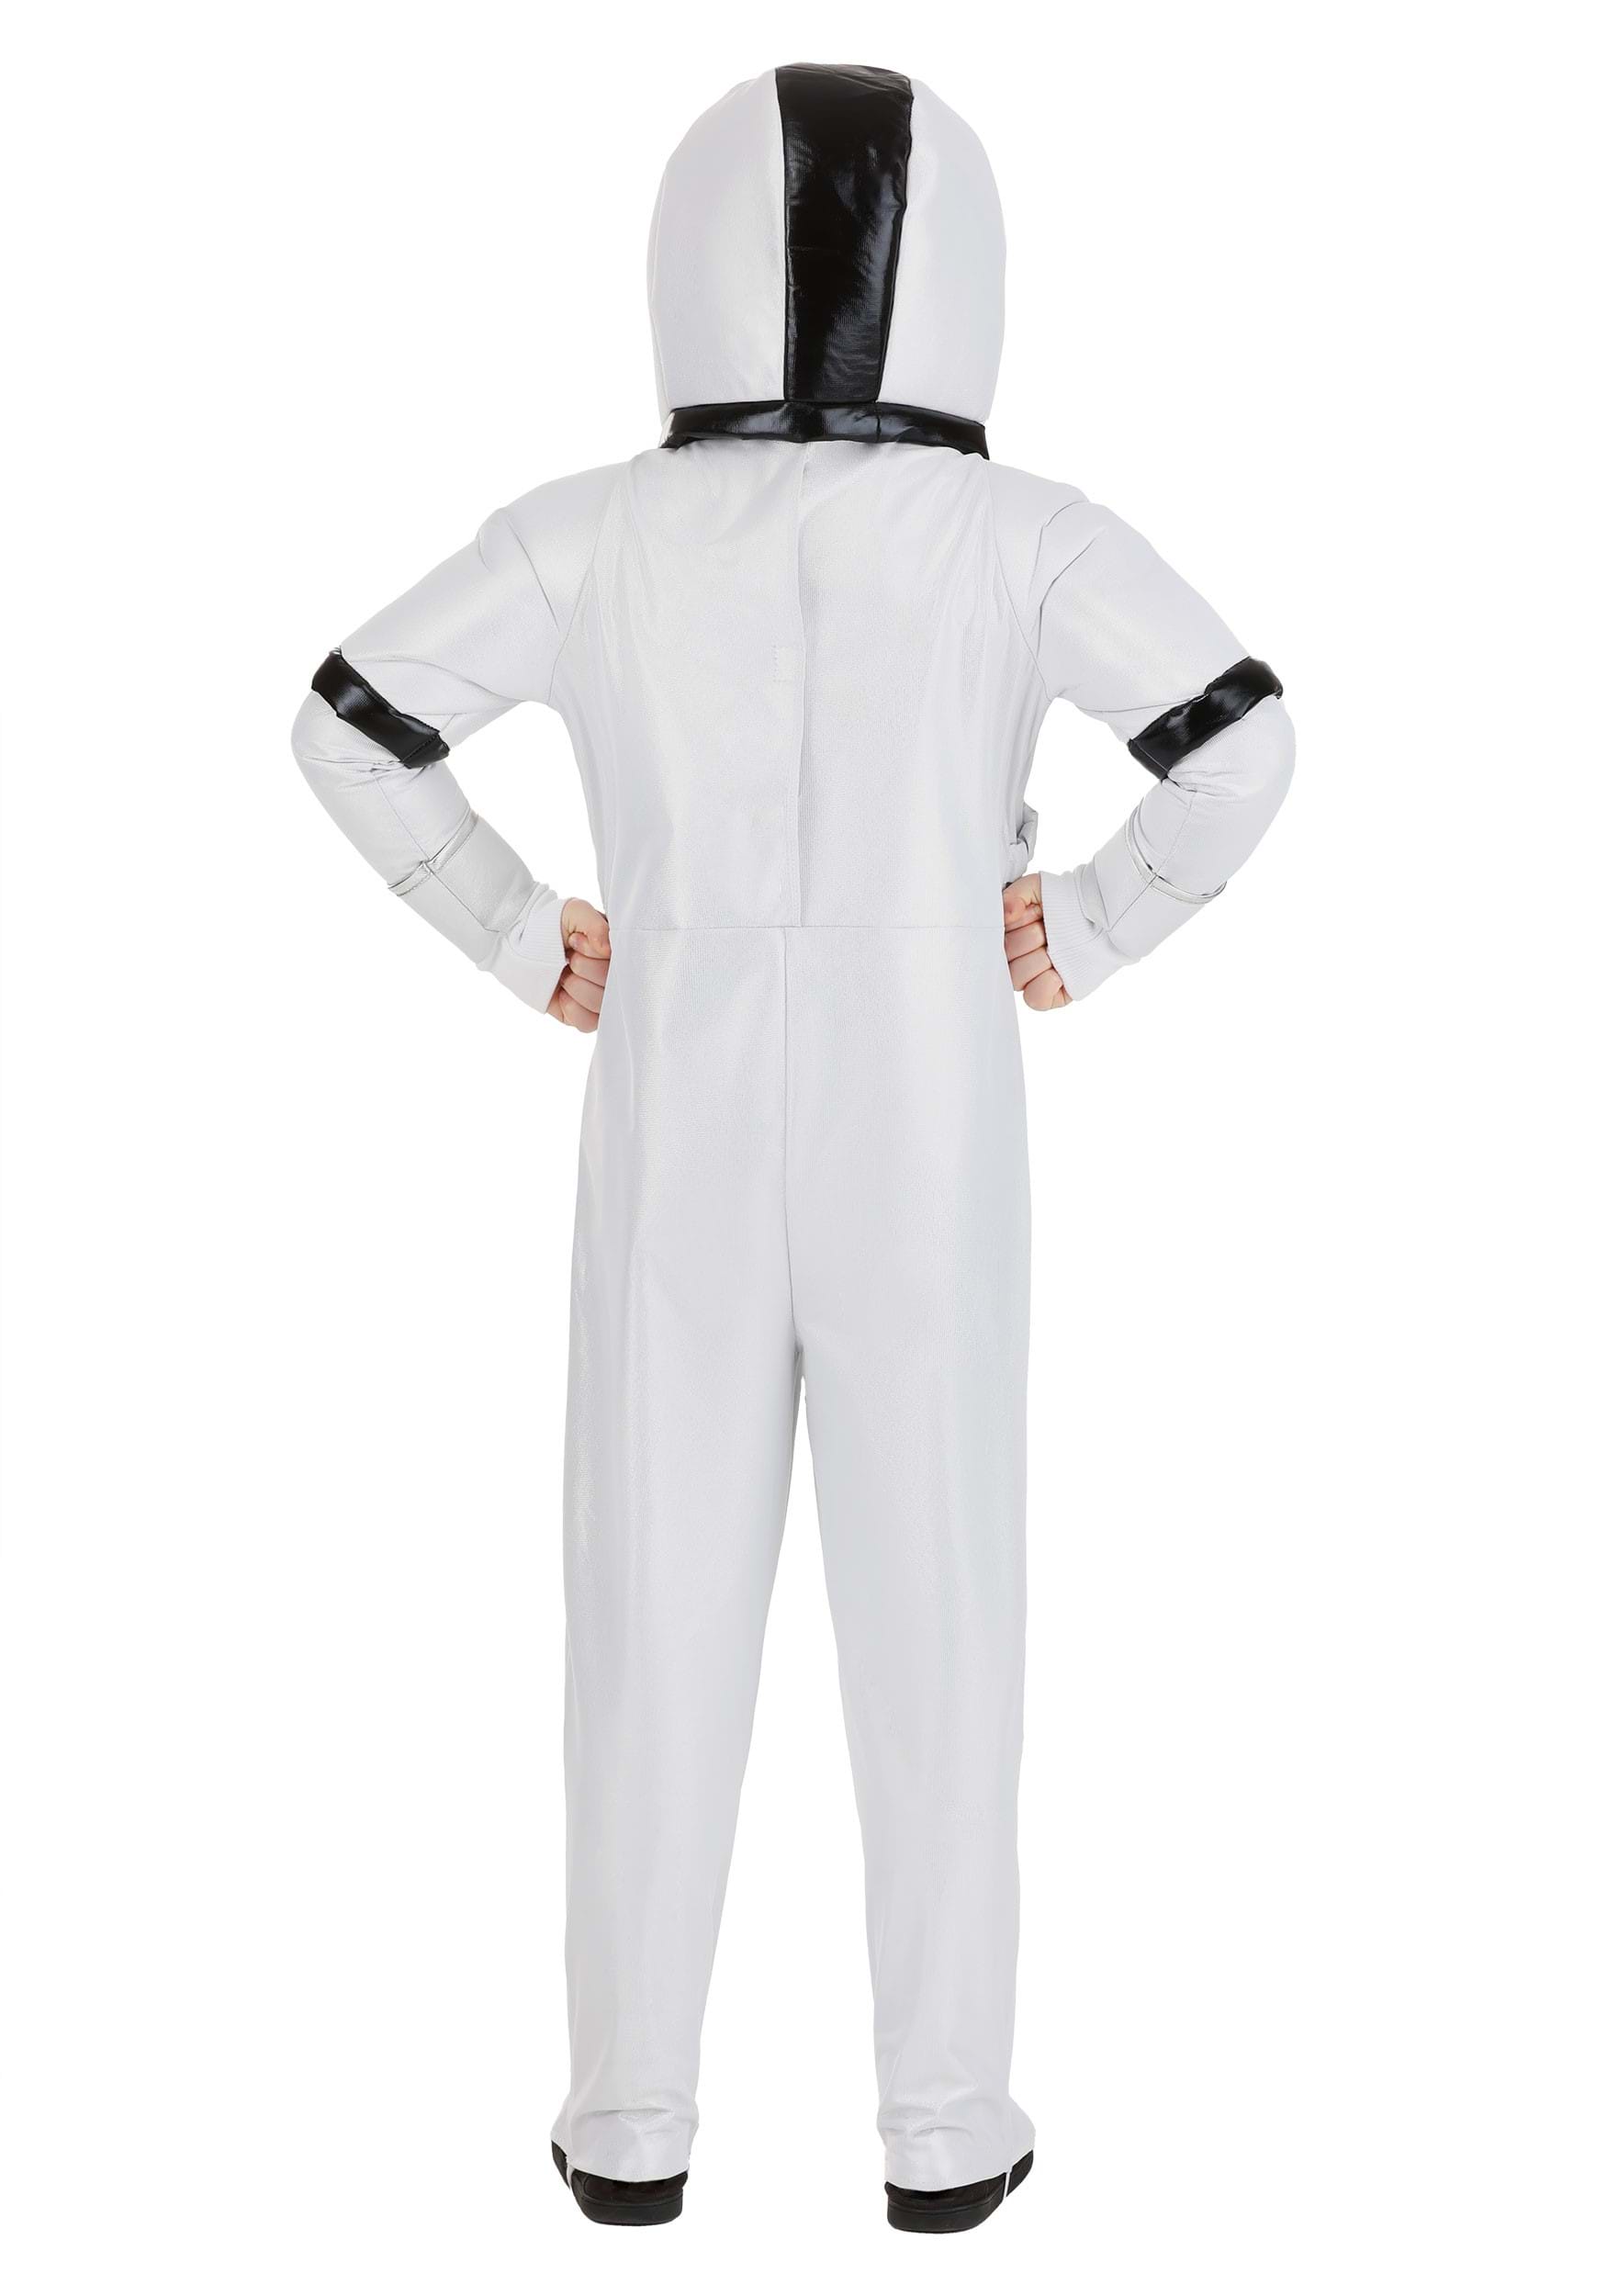 Ready For Space Kid's Astronaut Costume